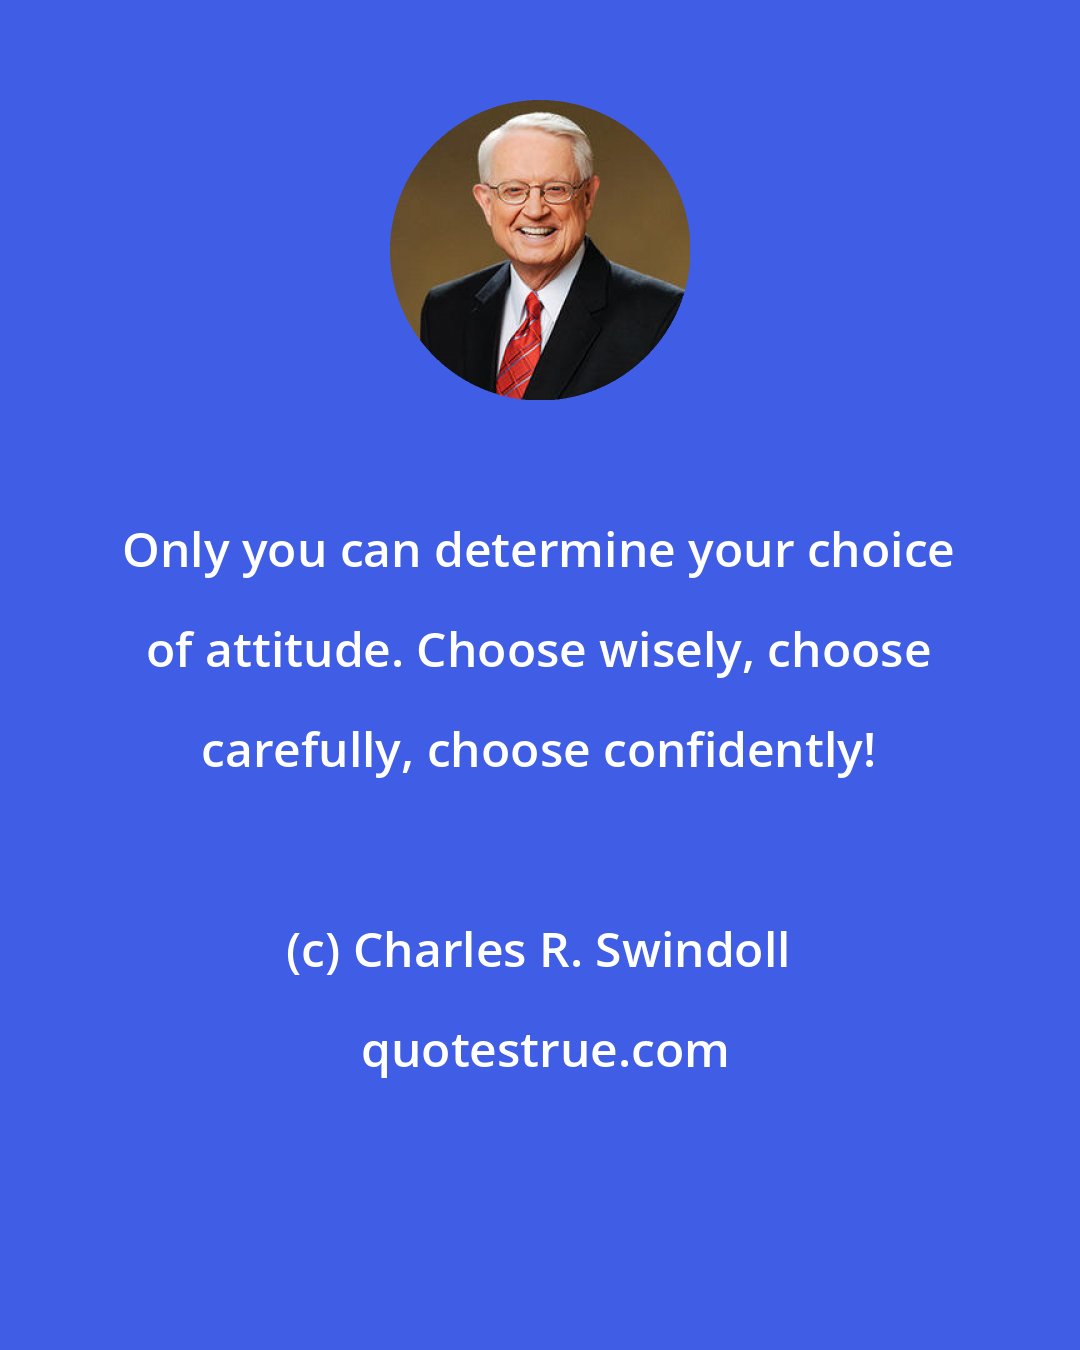 Charles R. Swindoll: Only you can determine your choice of attitude. Choose wisely, choose carefully, choose confidently!